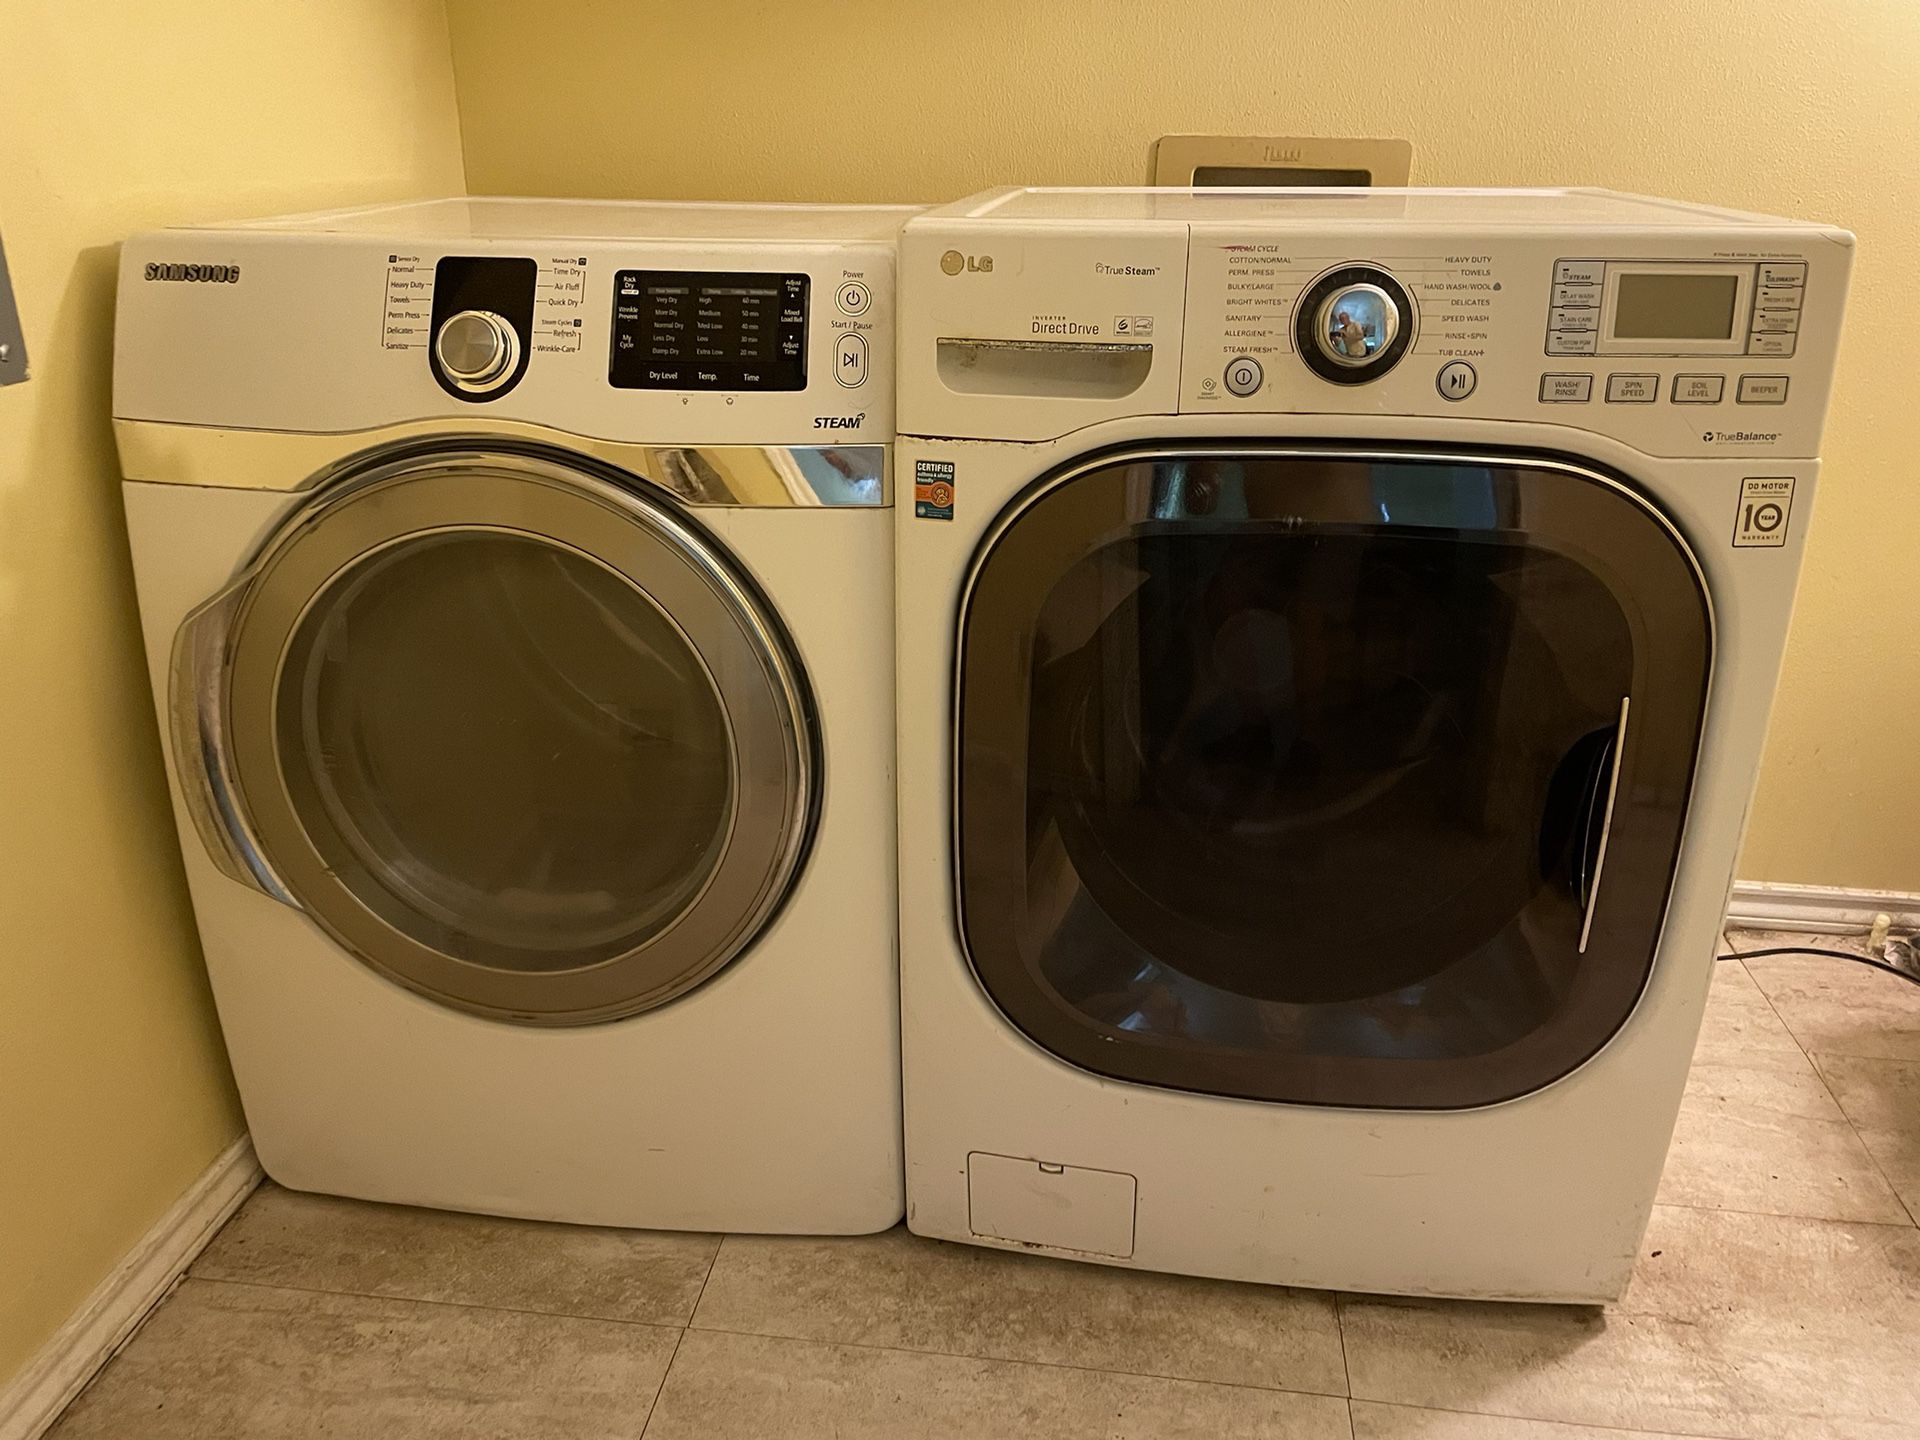 LG Washer and Samsung Dryer